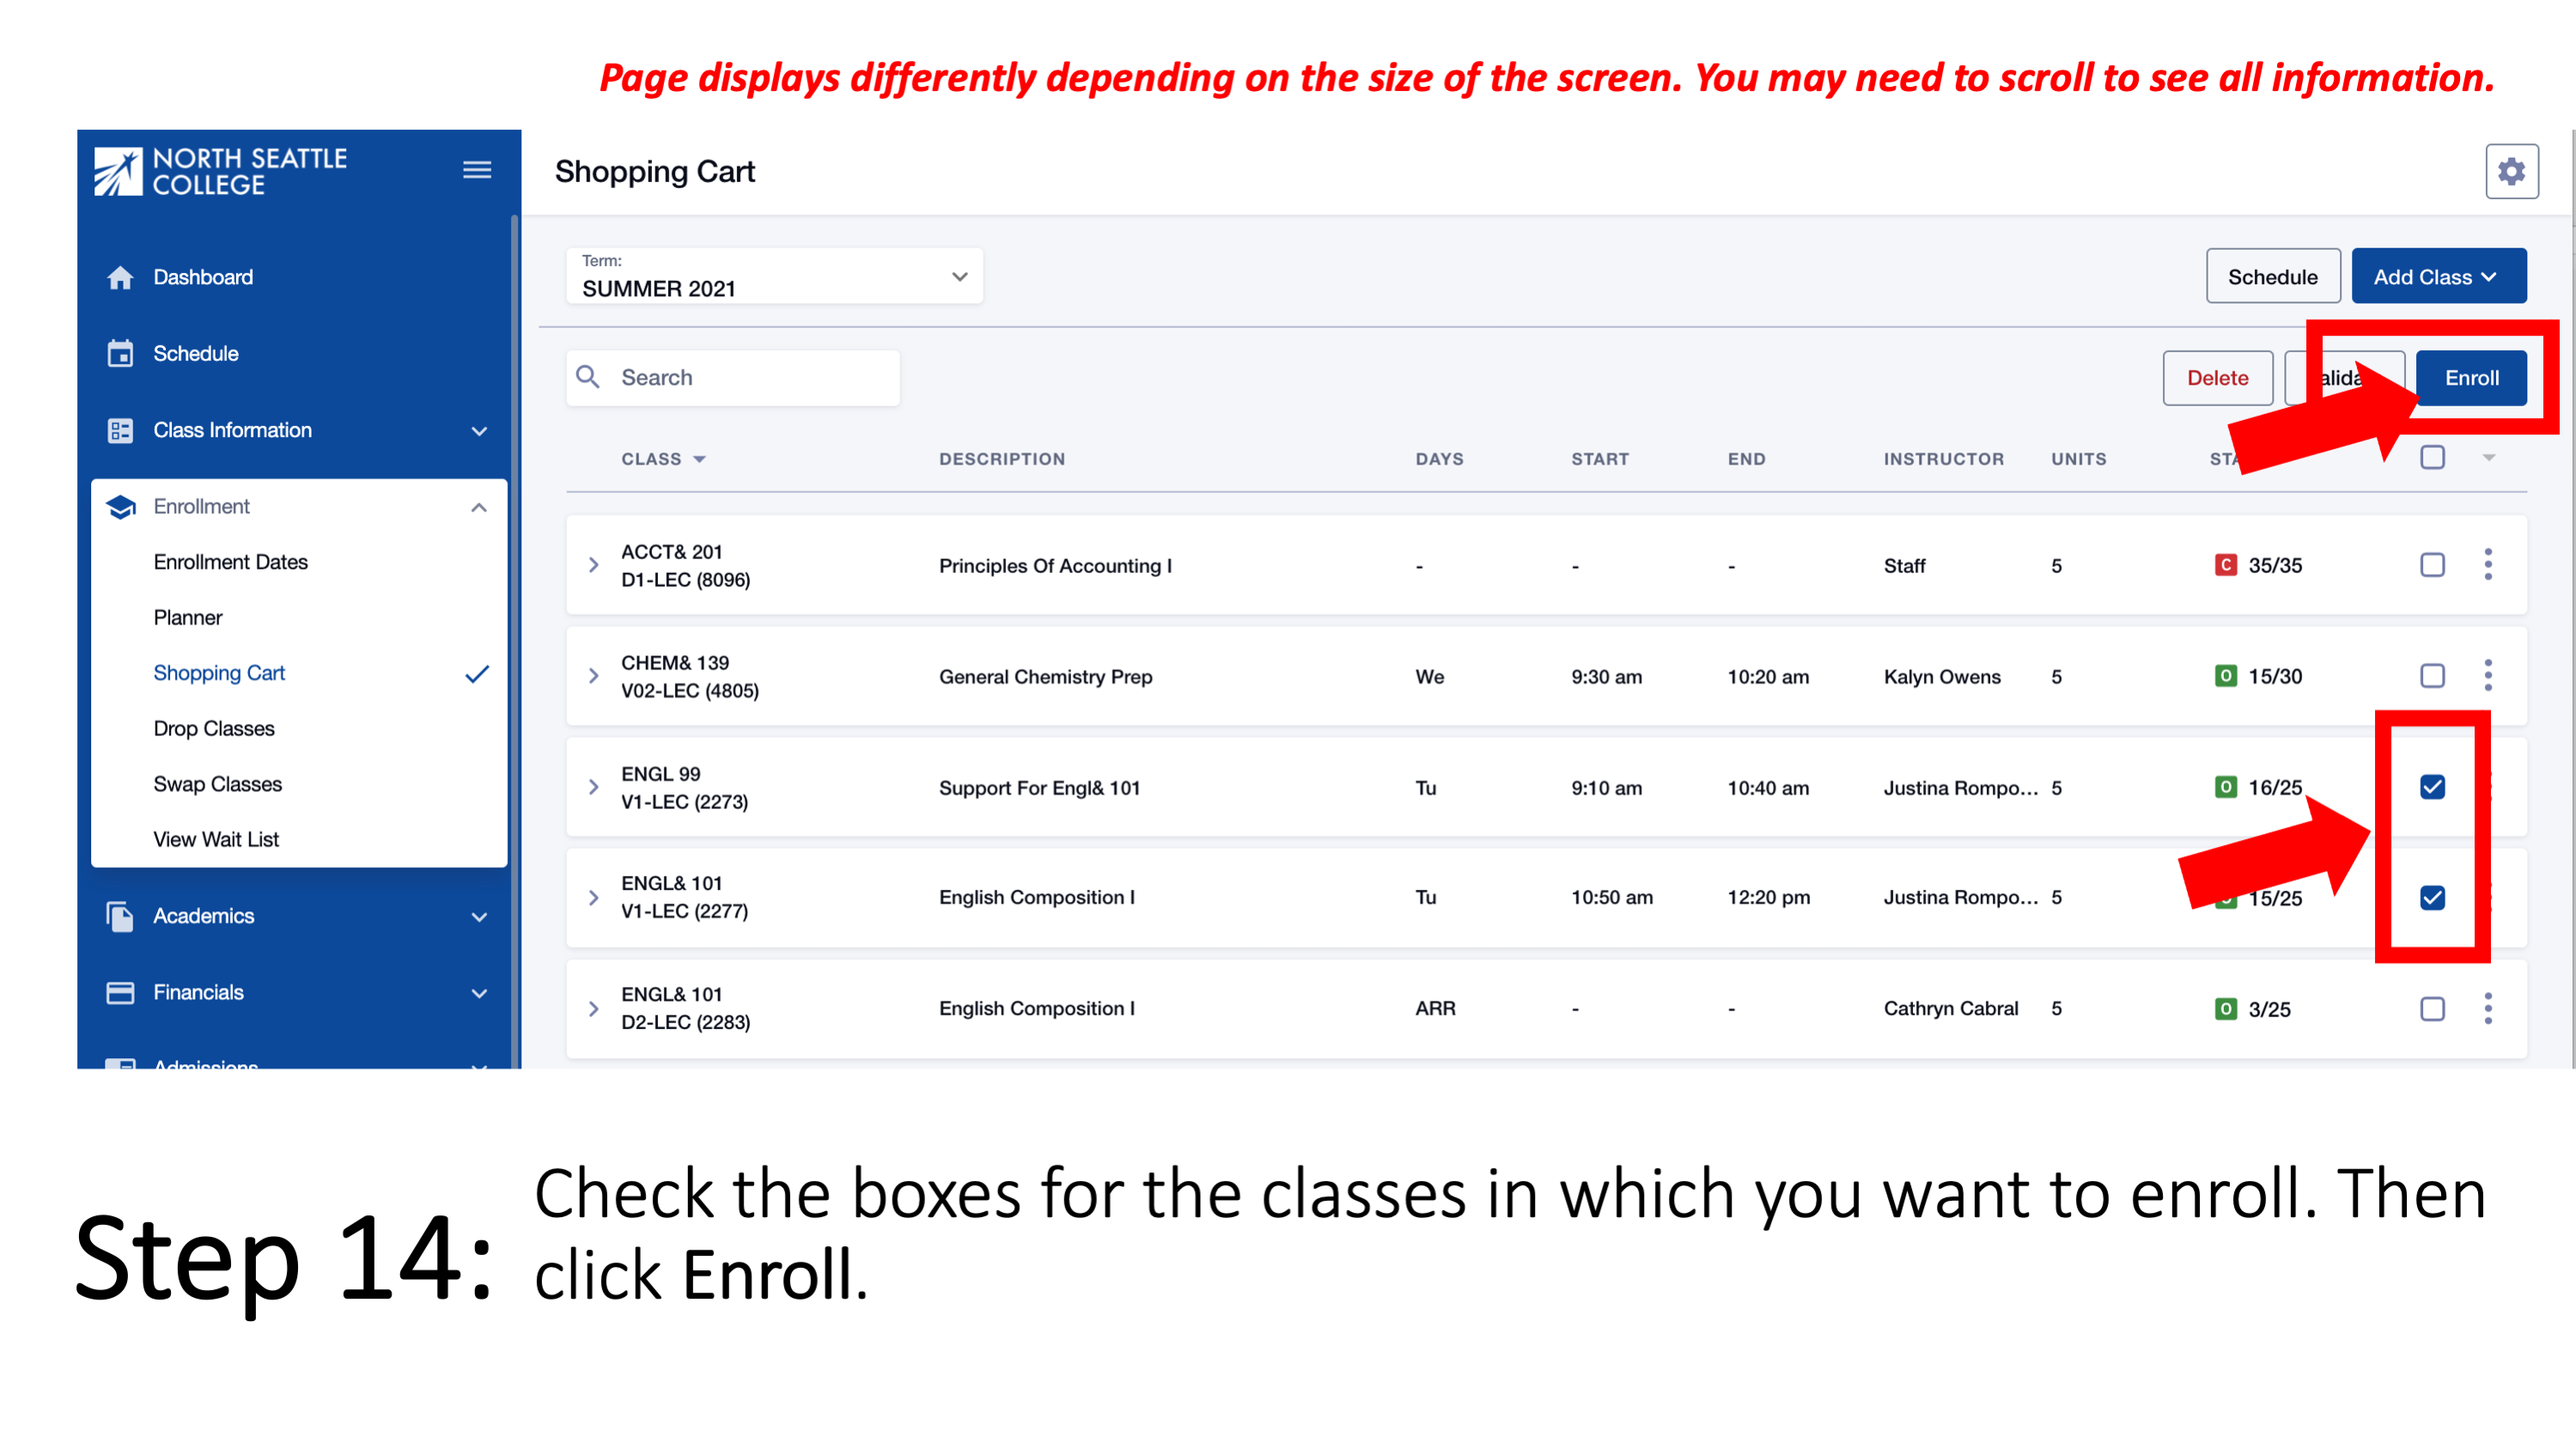 Step 14: Check the boxes for the classes in which you want to enroll. Then click Enroll. Page displays differently depending on the size of the screen. You may need to scroll to see all information.